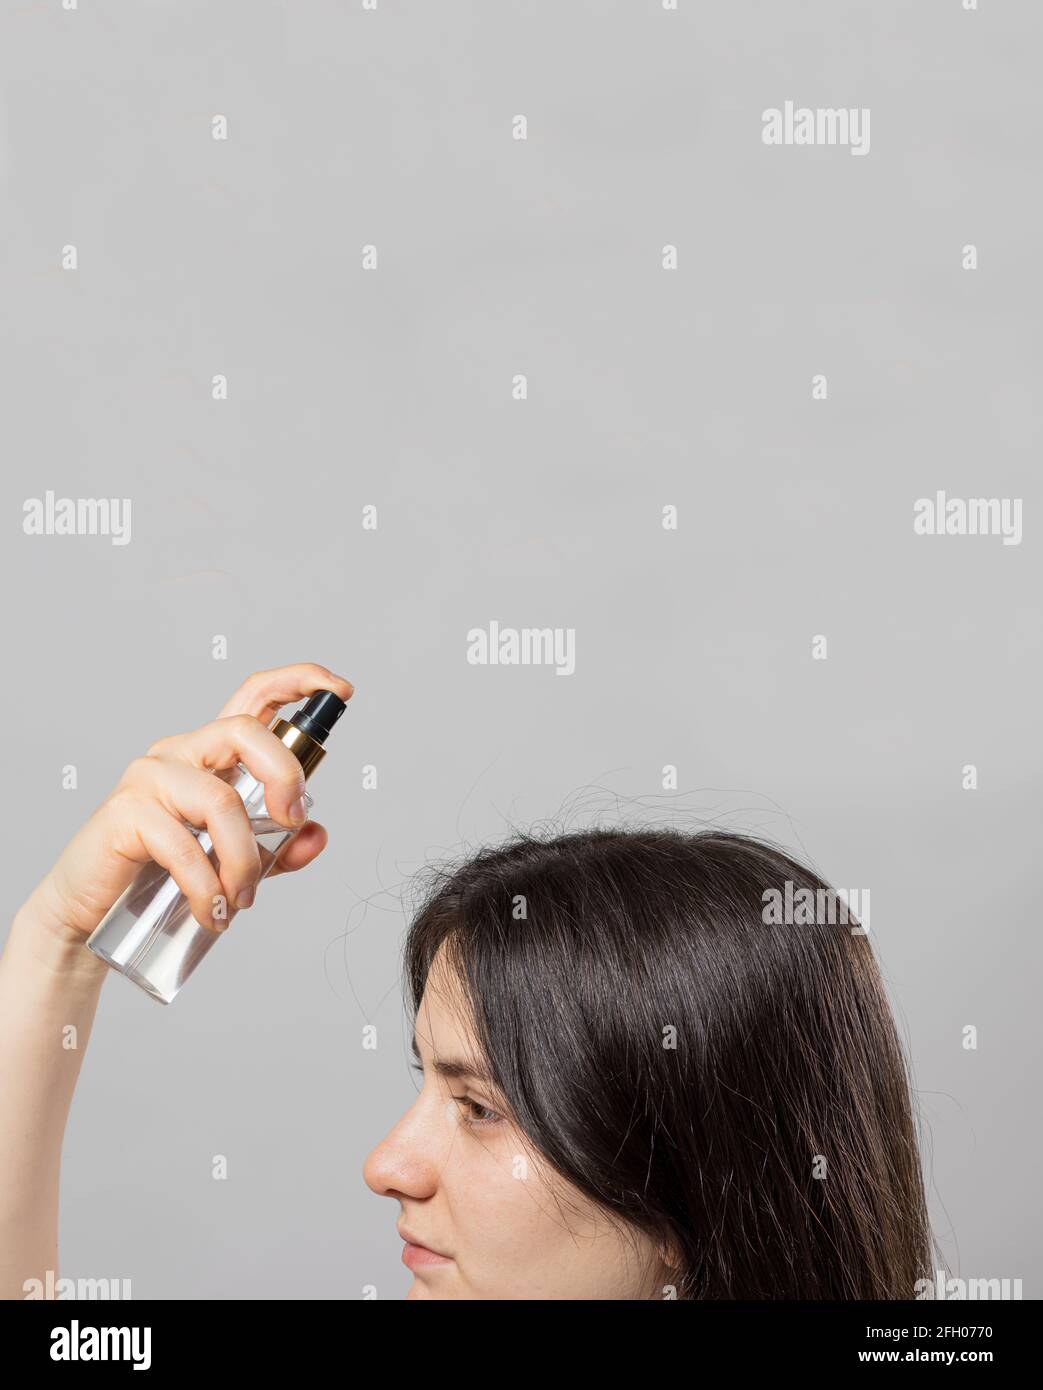 The girl puts on her hair a tonic of hydrolyte from a bottle. Hair care at home. Vertical photo with place for text. Stock Photo